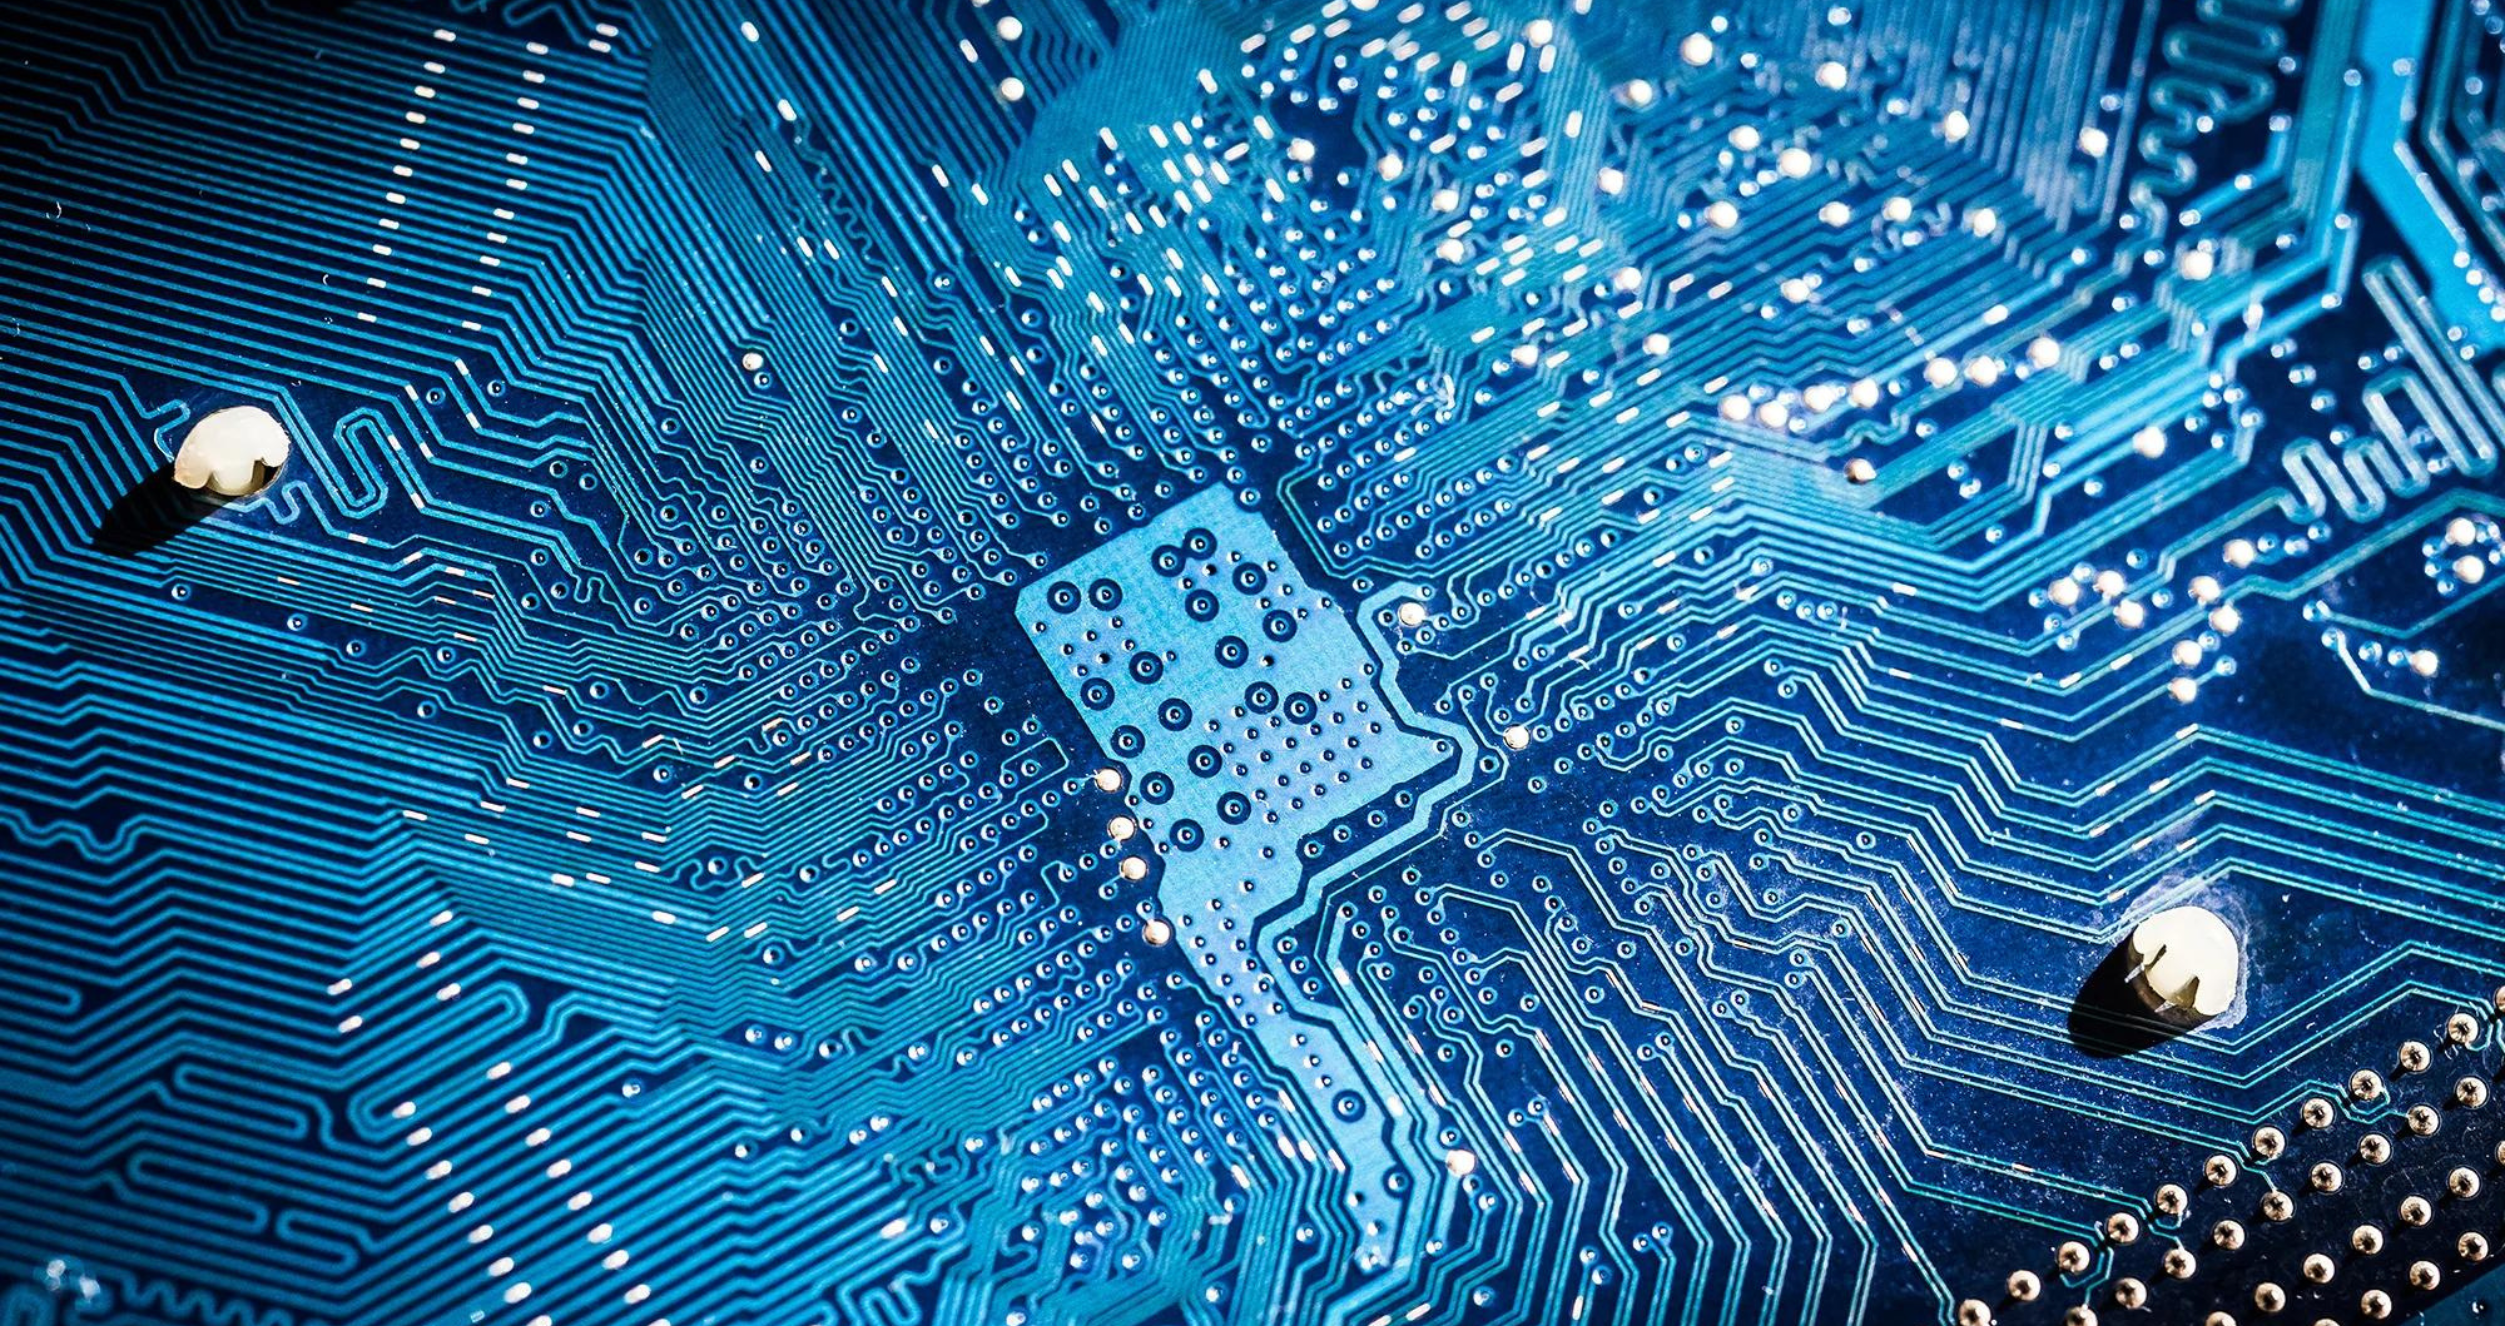 A detailed view of a circuit board